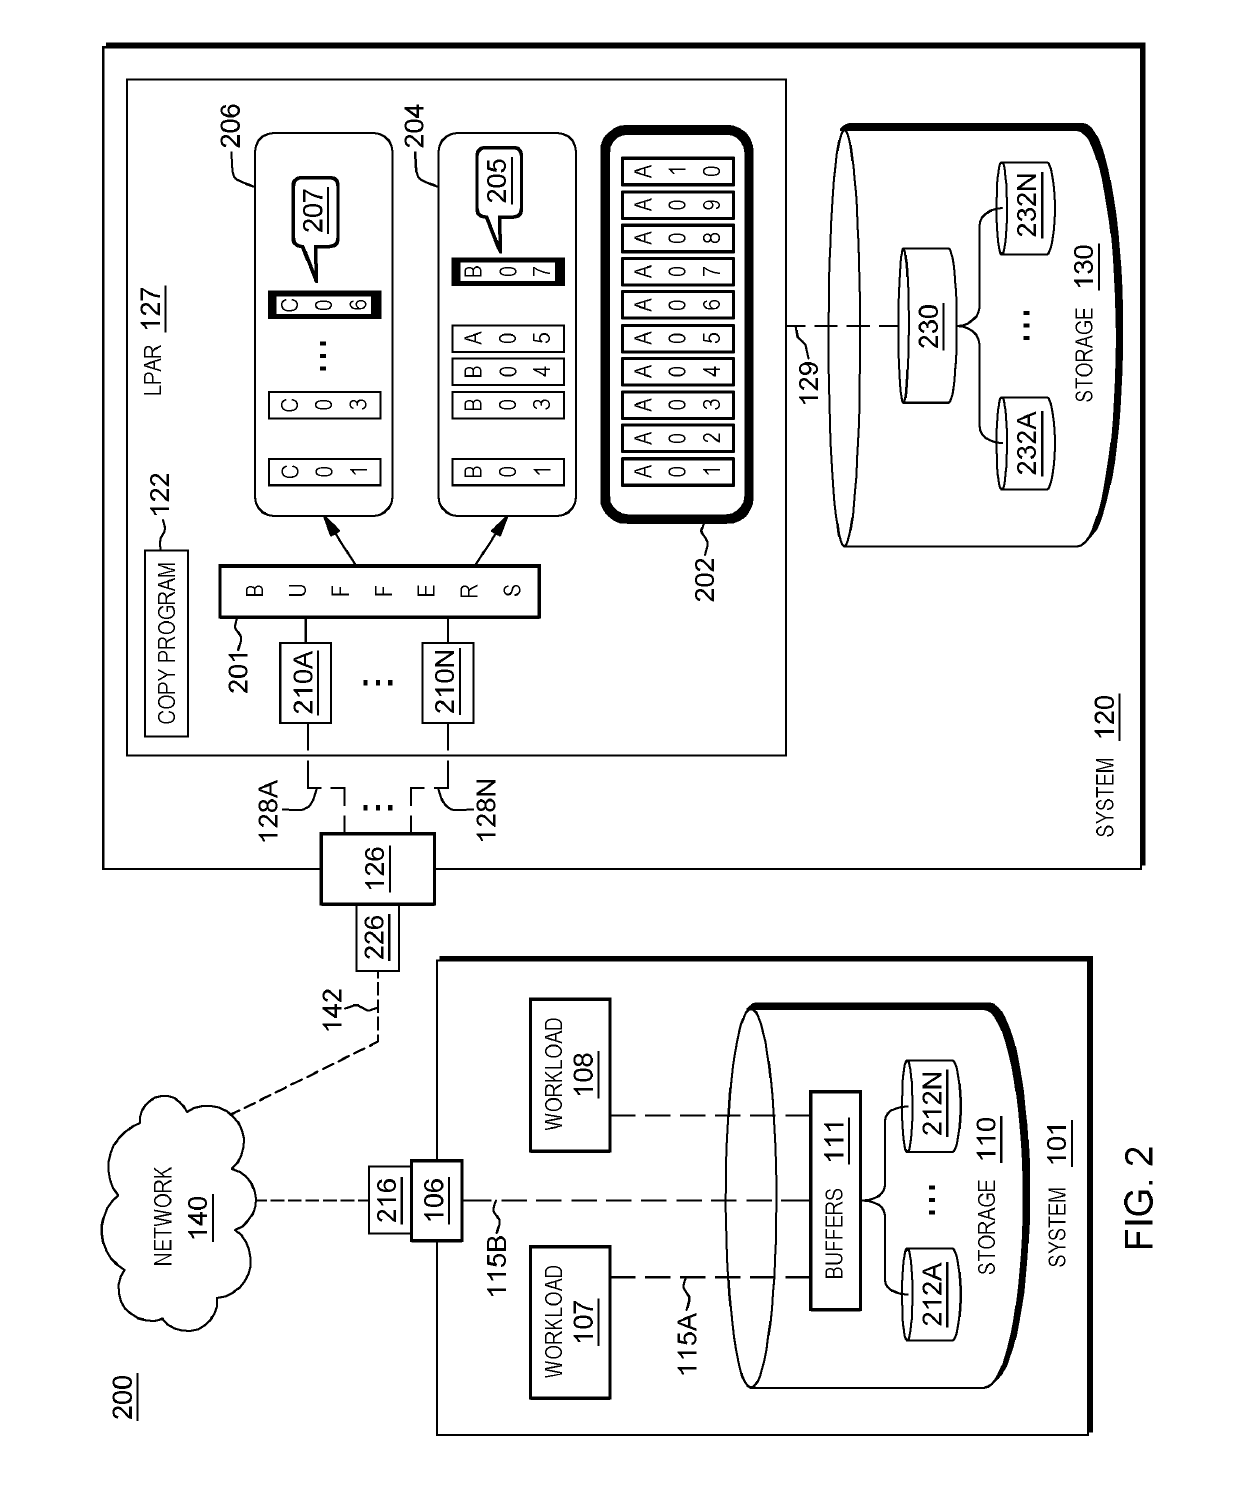 Modifying aspects of a storage system associated with data mirroring